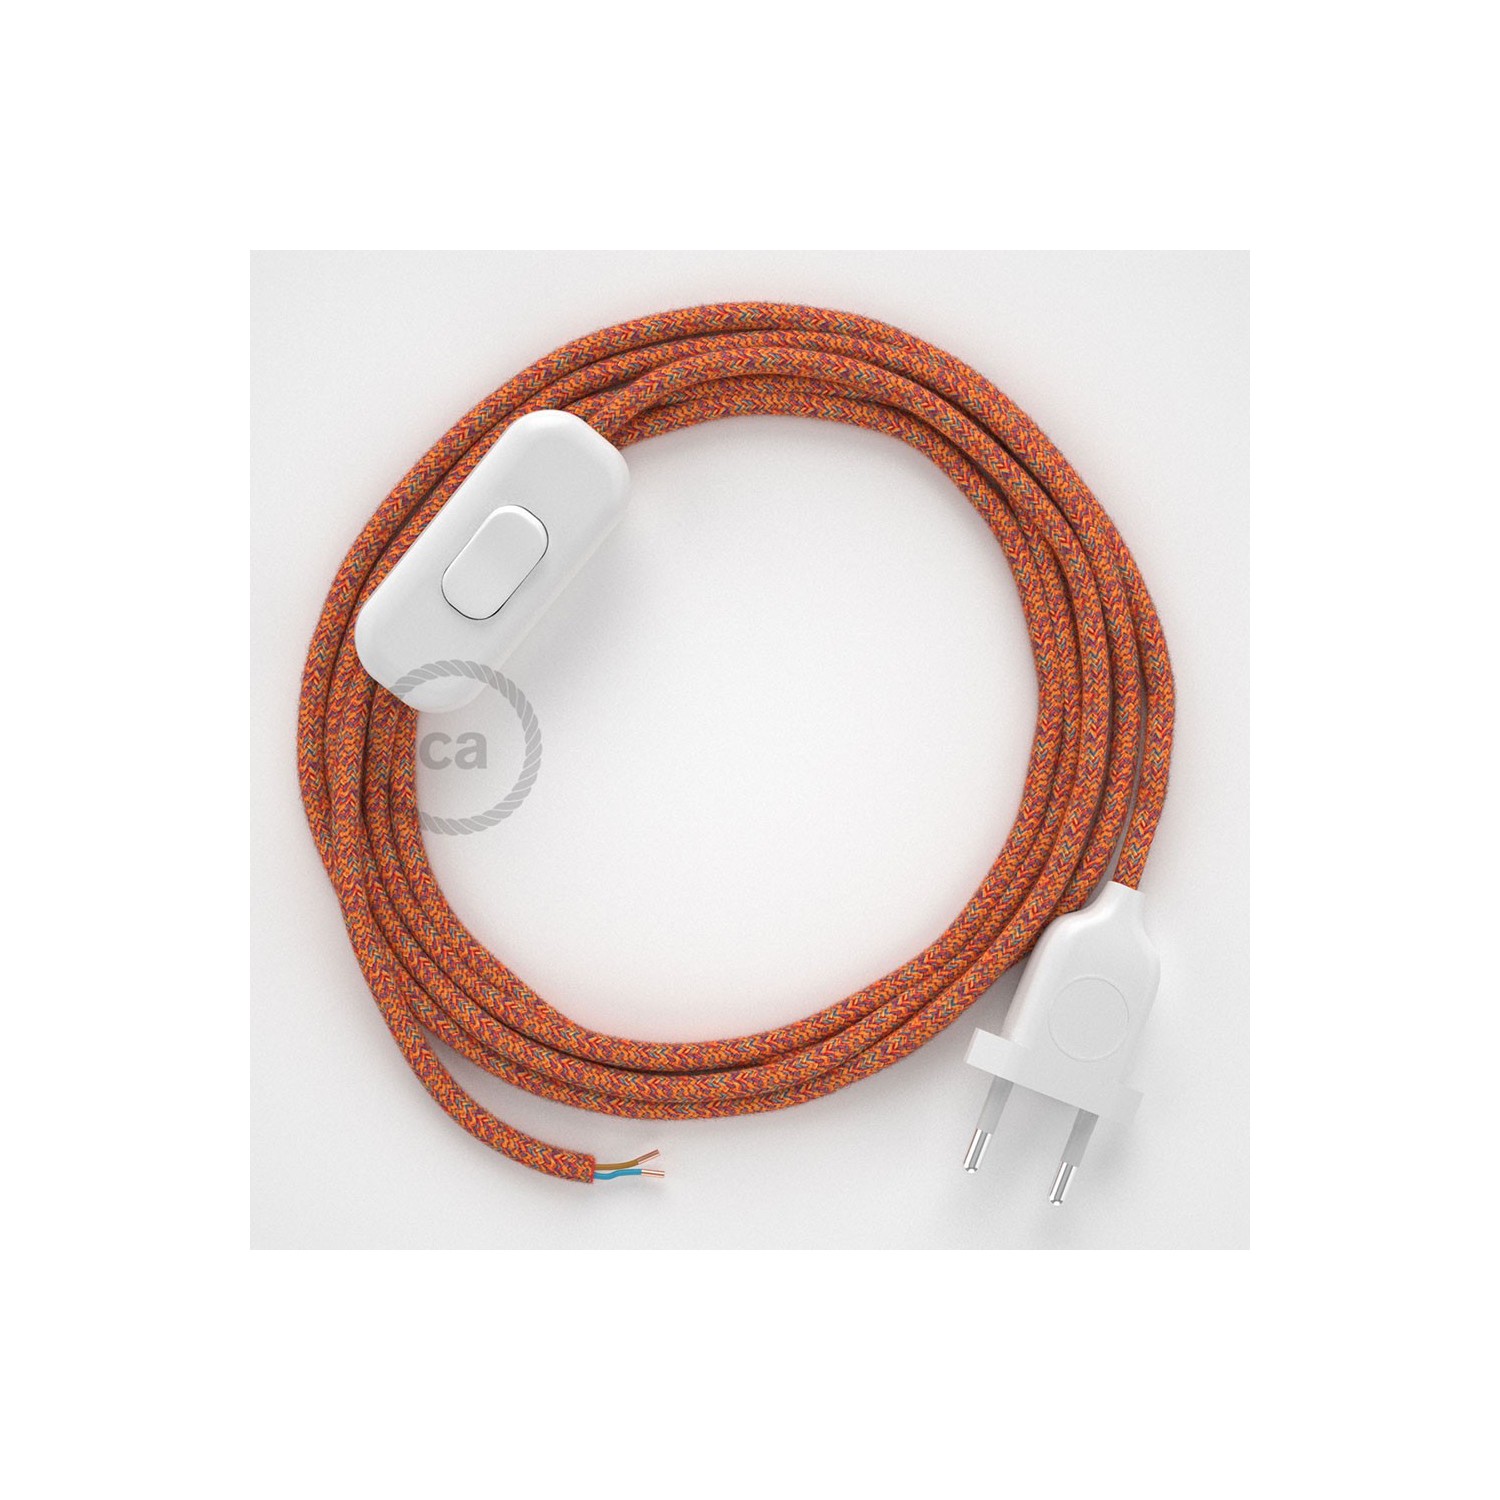 Lamp wiring, RX07 Indian Summer Cotton 1,80 m. Choose the colour of the switch and plug.